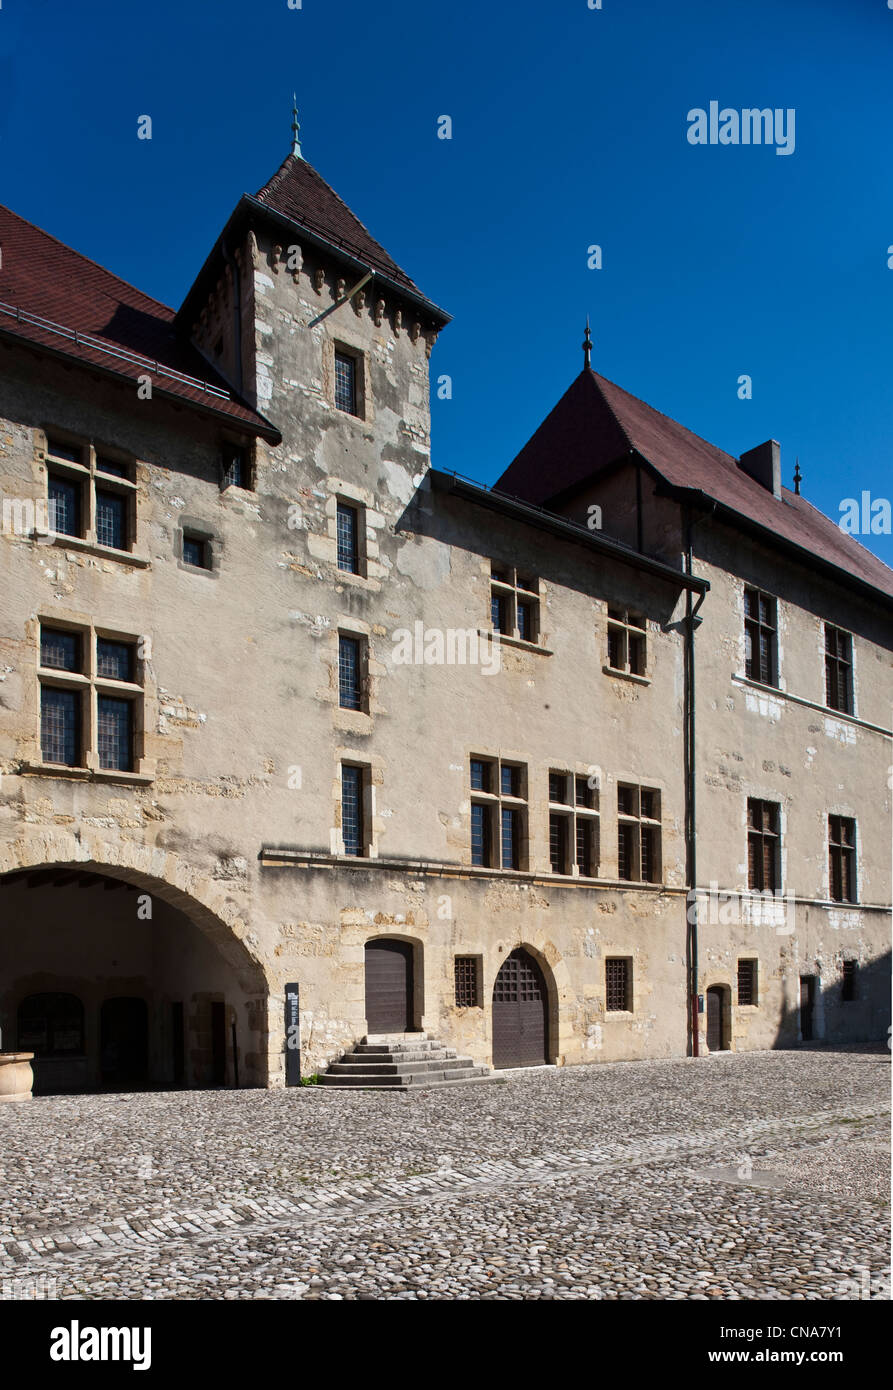 France, Haute Savoie, Annecy, the Castle, the courtyard and the Vieux Logis Stock Photo